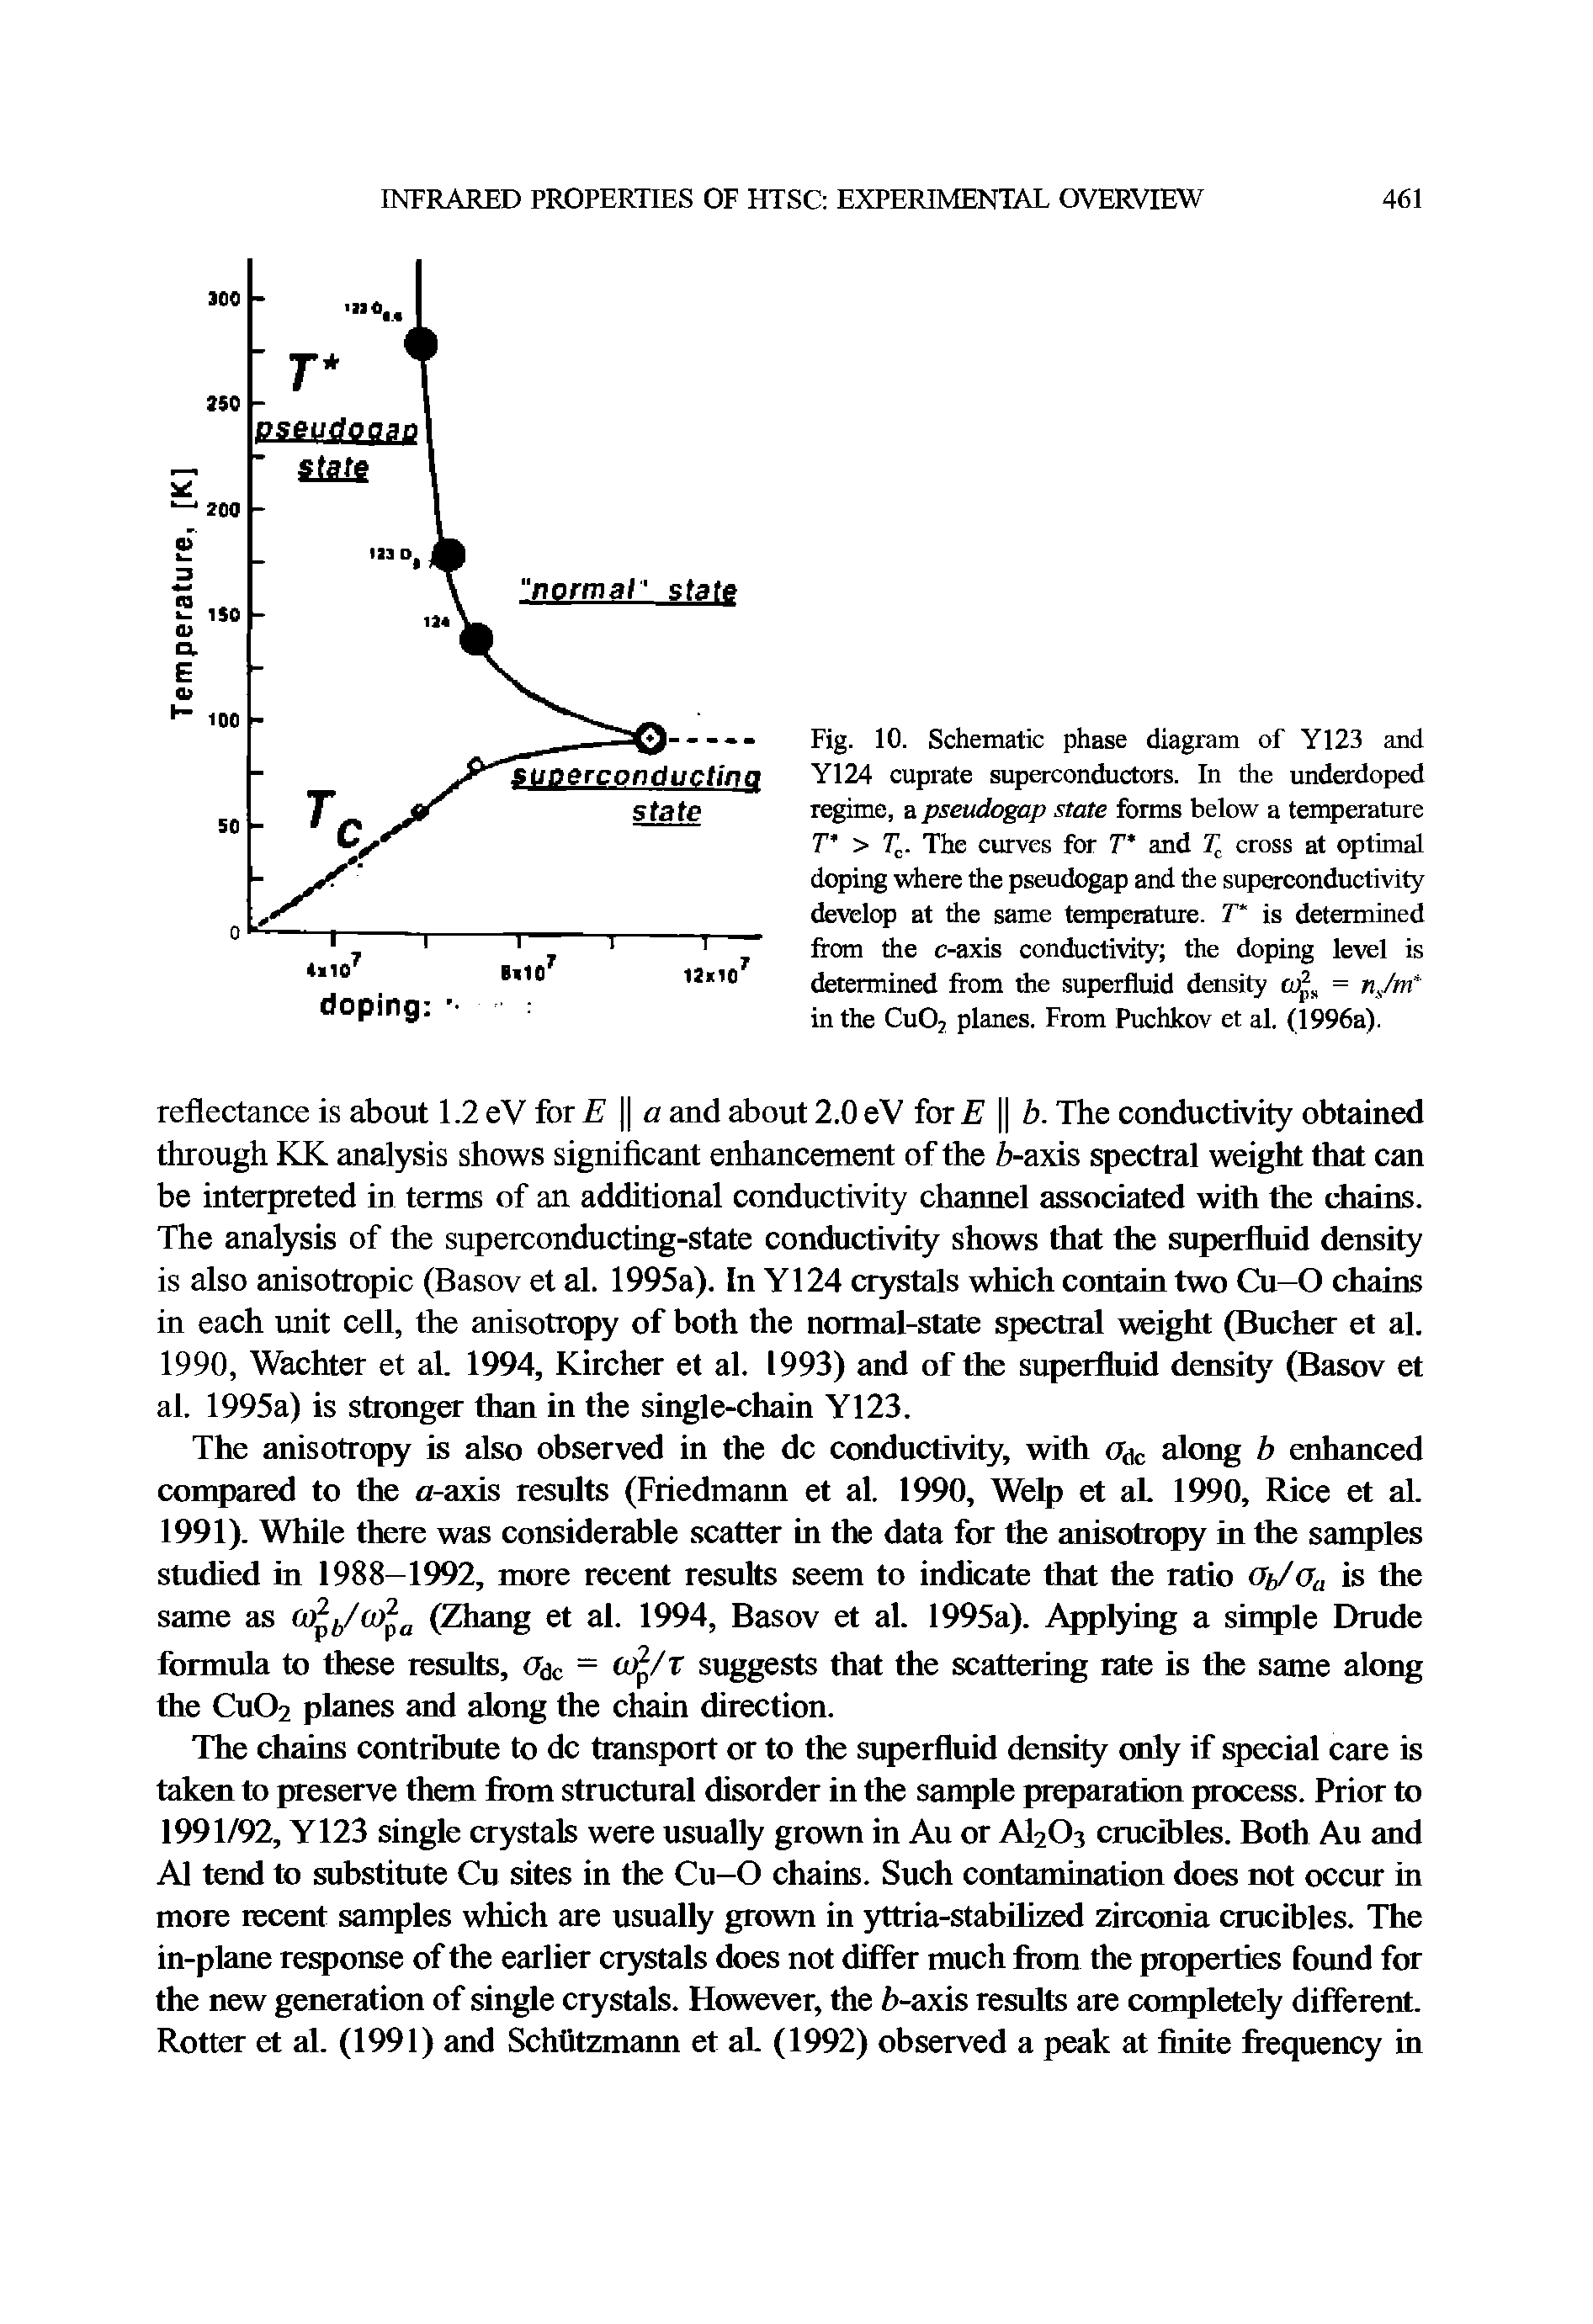 Fig. 10. Schematic phase diagram of Y123 and Y124 cuprate superconductors. In the underdoped regime, a pseudogap state forms below a temperature T > 7. The curves for 7 and 7 cross at optimal doping where the pseudogap and the superconductivity develop at the same tempeiature. T is determined from the c-axis conductivity the doping level is determined from the superfluid density = n/ni in the CUO2 planes. From Puchkov et al. (1996a).